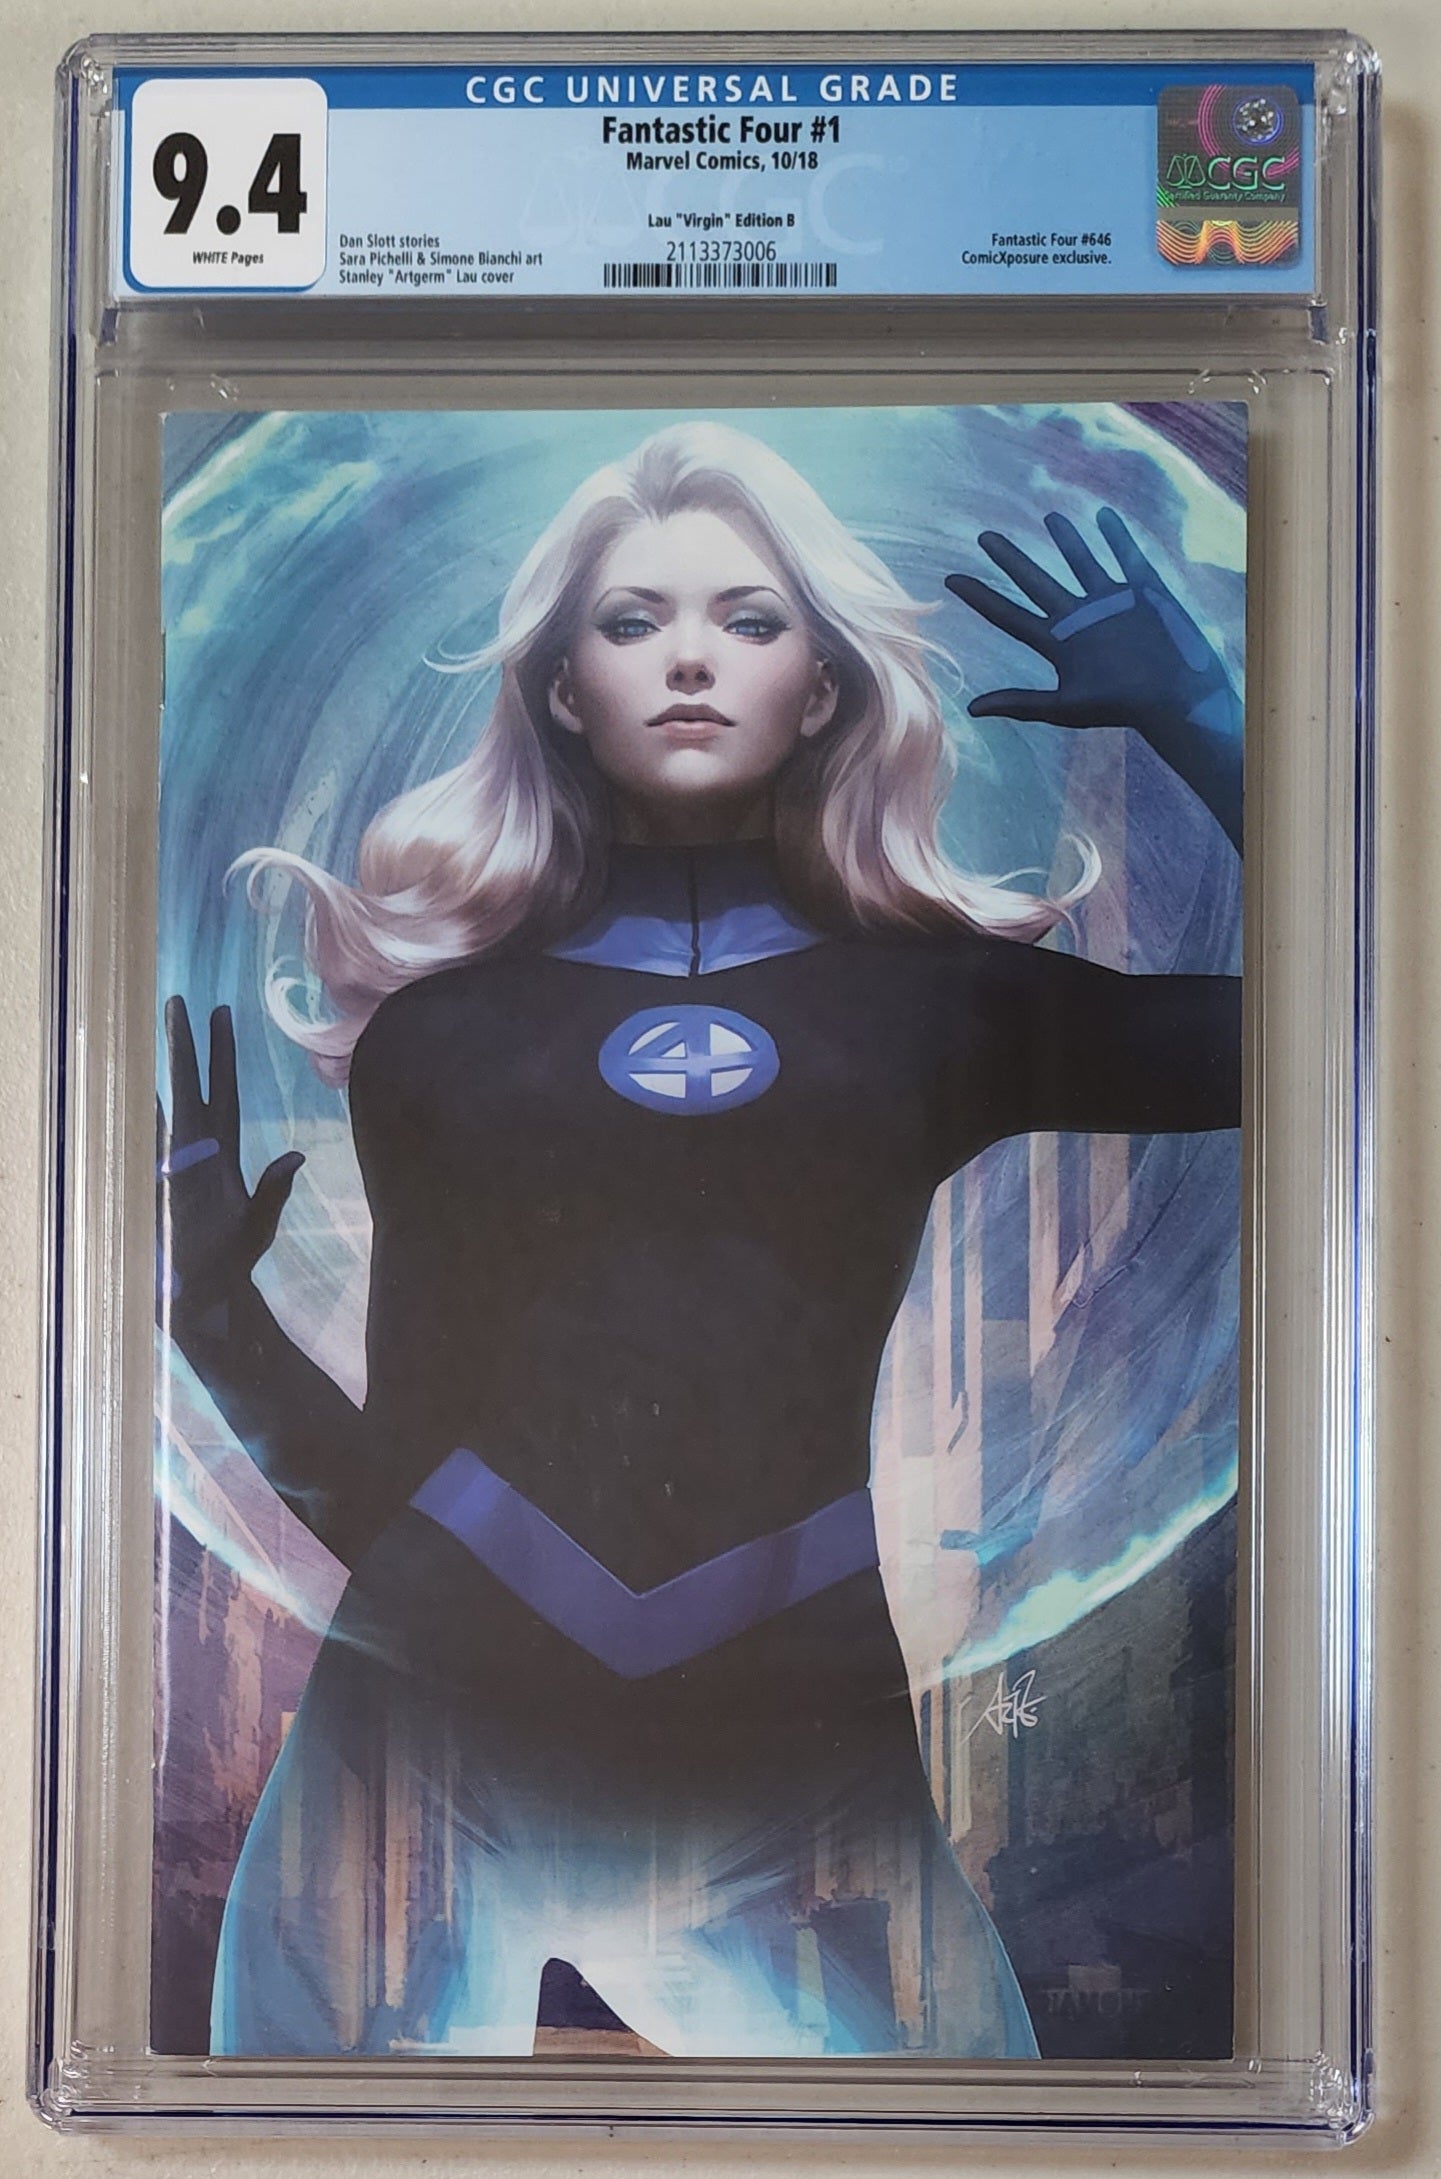 invisible woman fantastic four